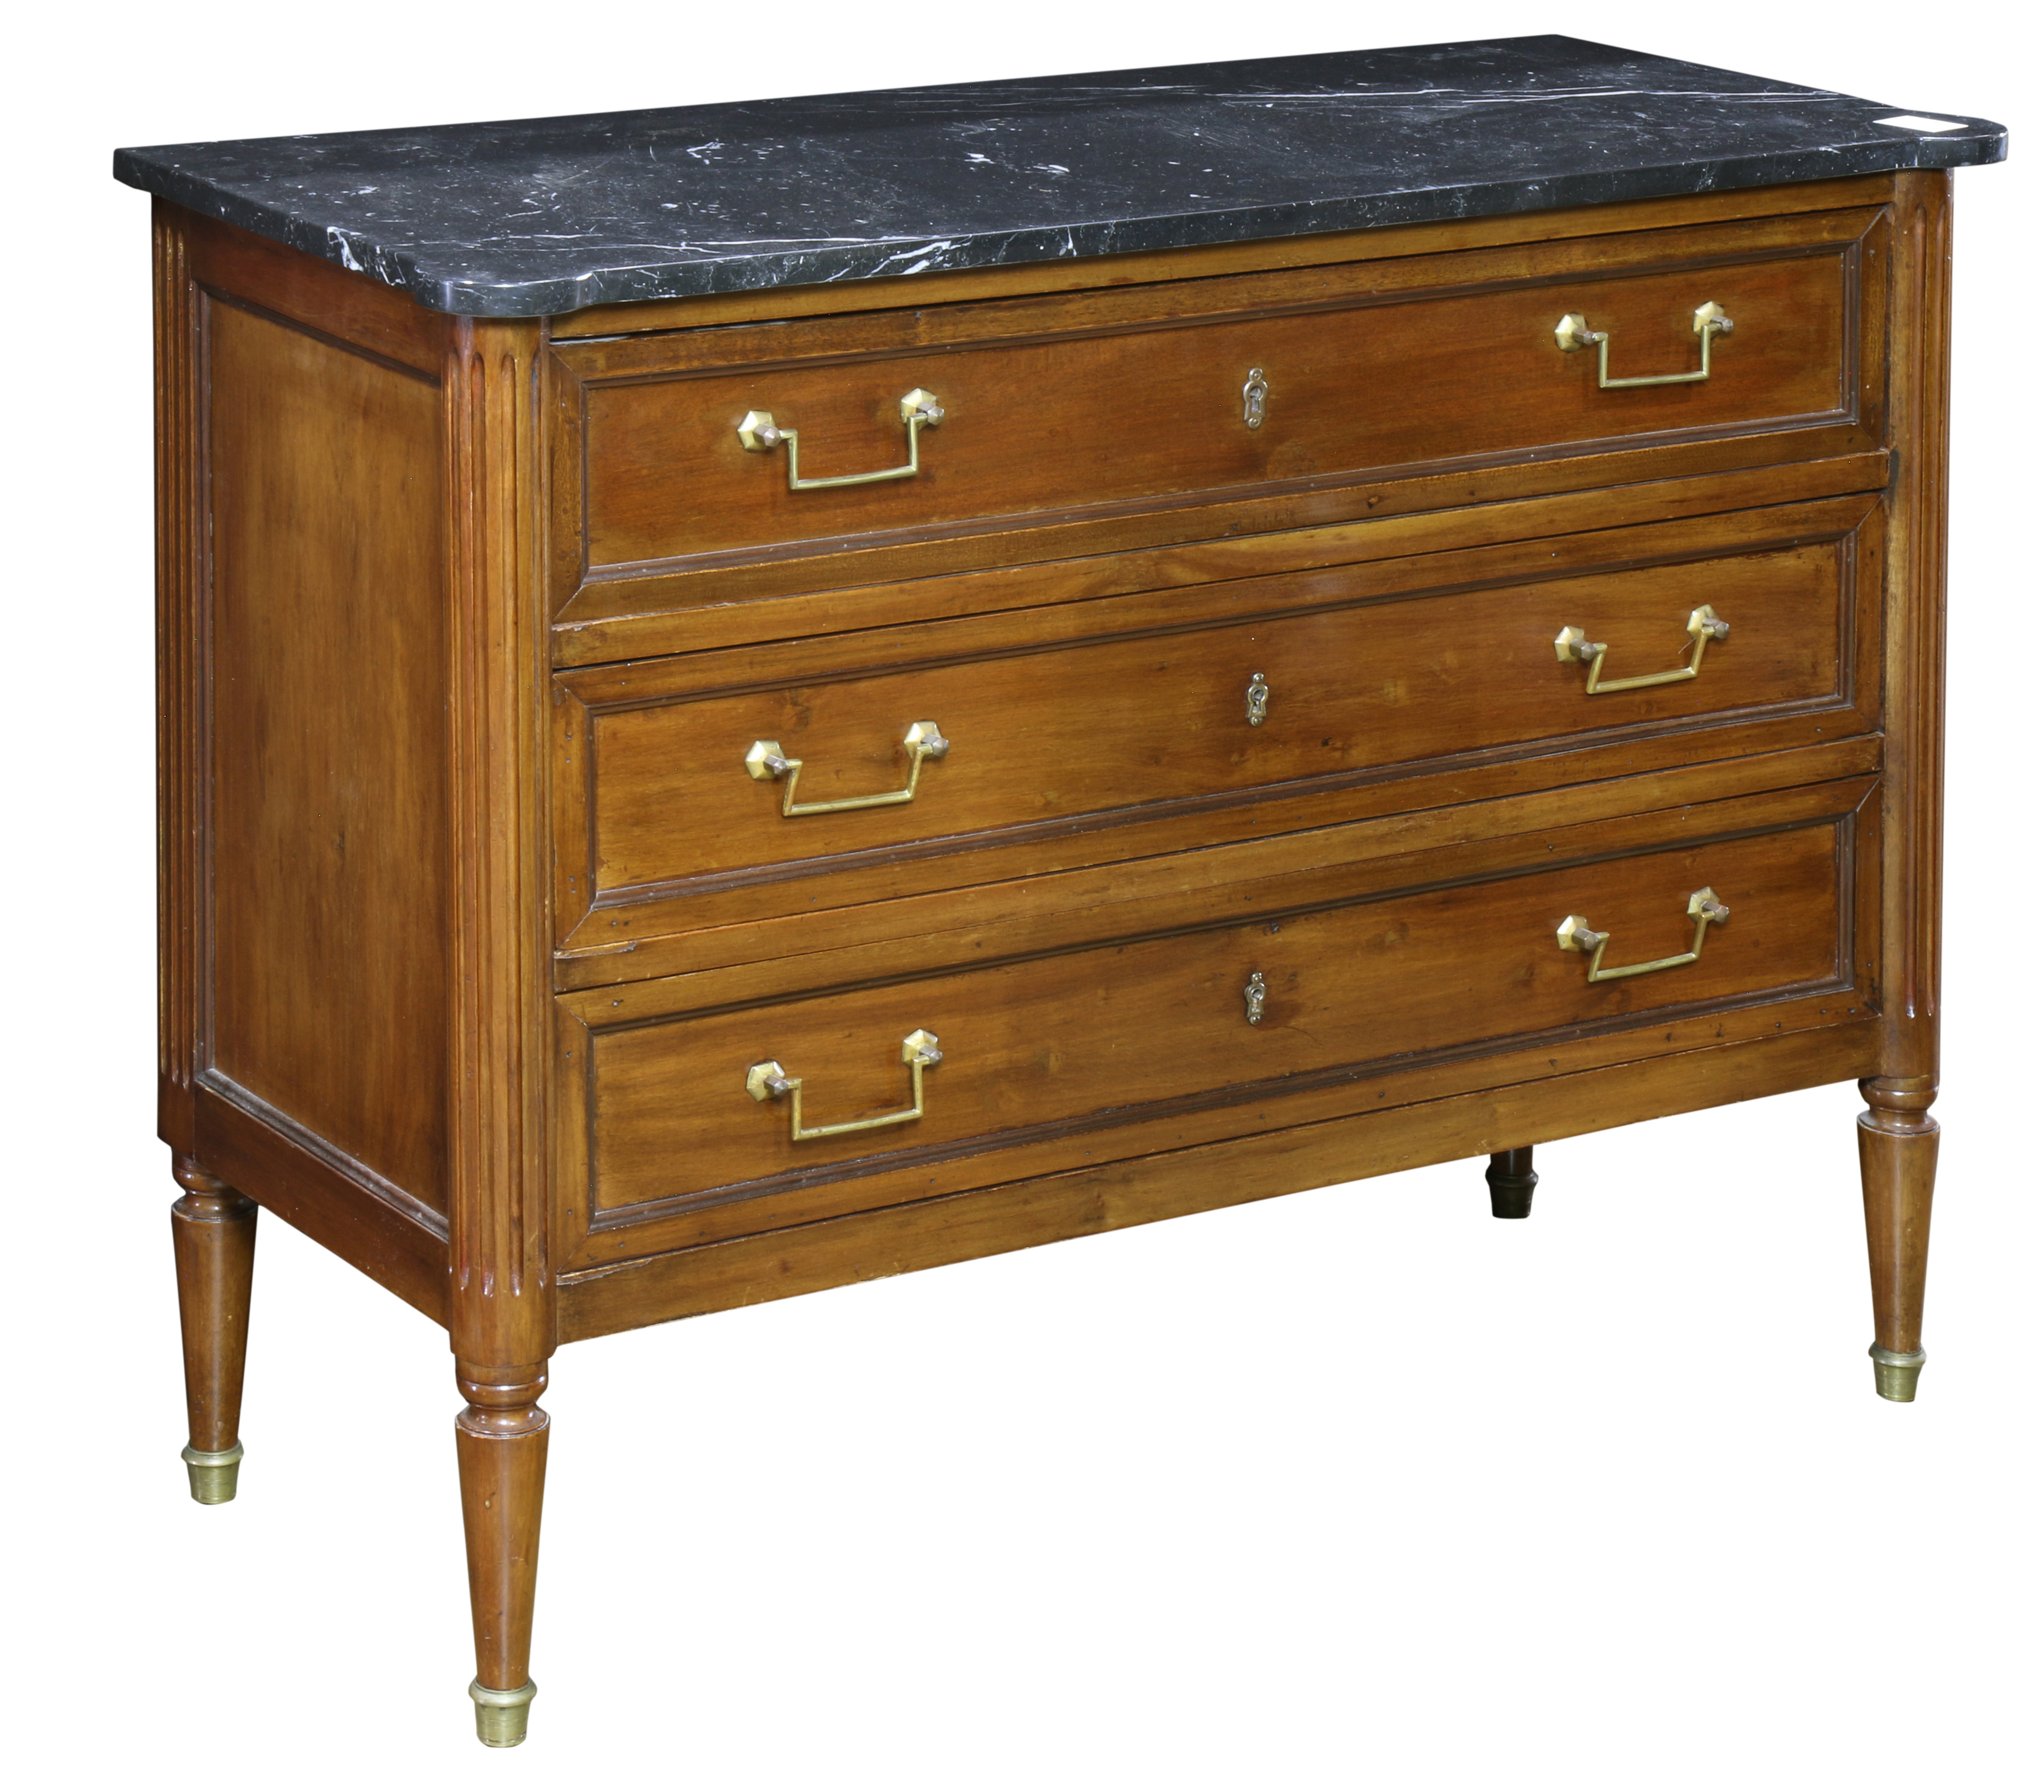 NEOCLASSICAL STYLE MARBLE TOP CHEST 3a6292